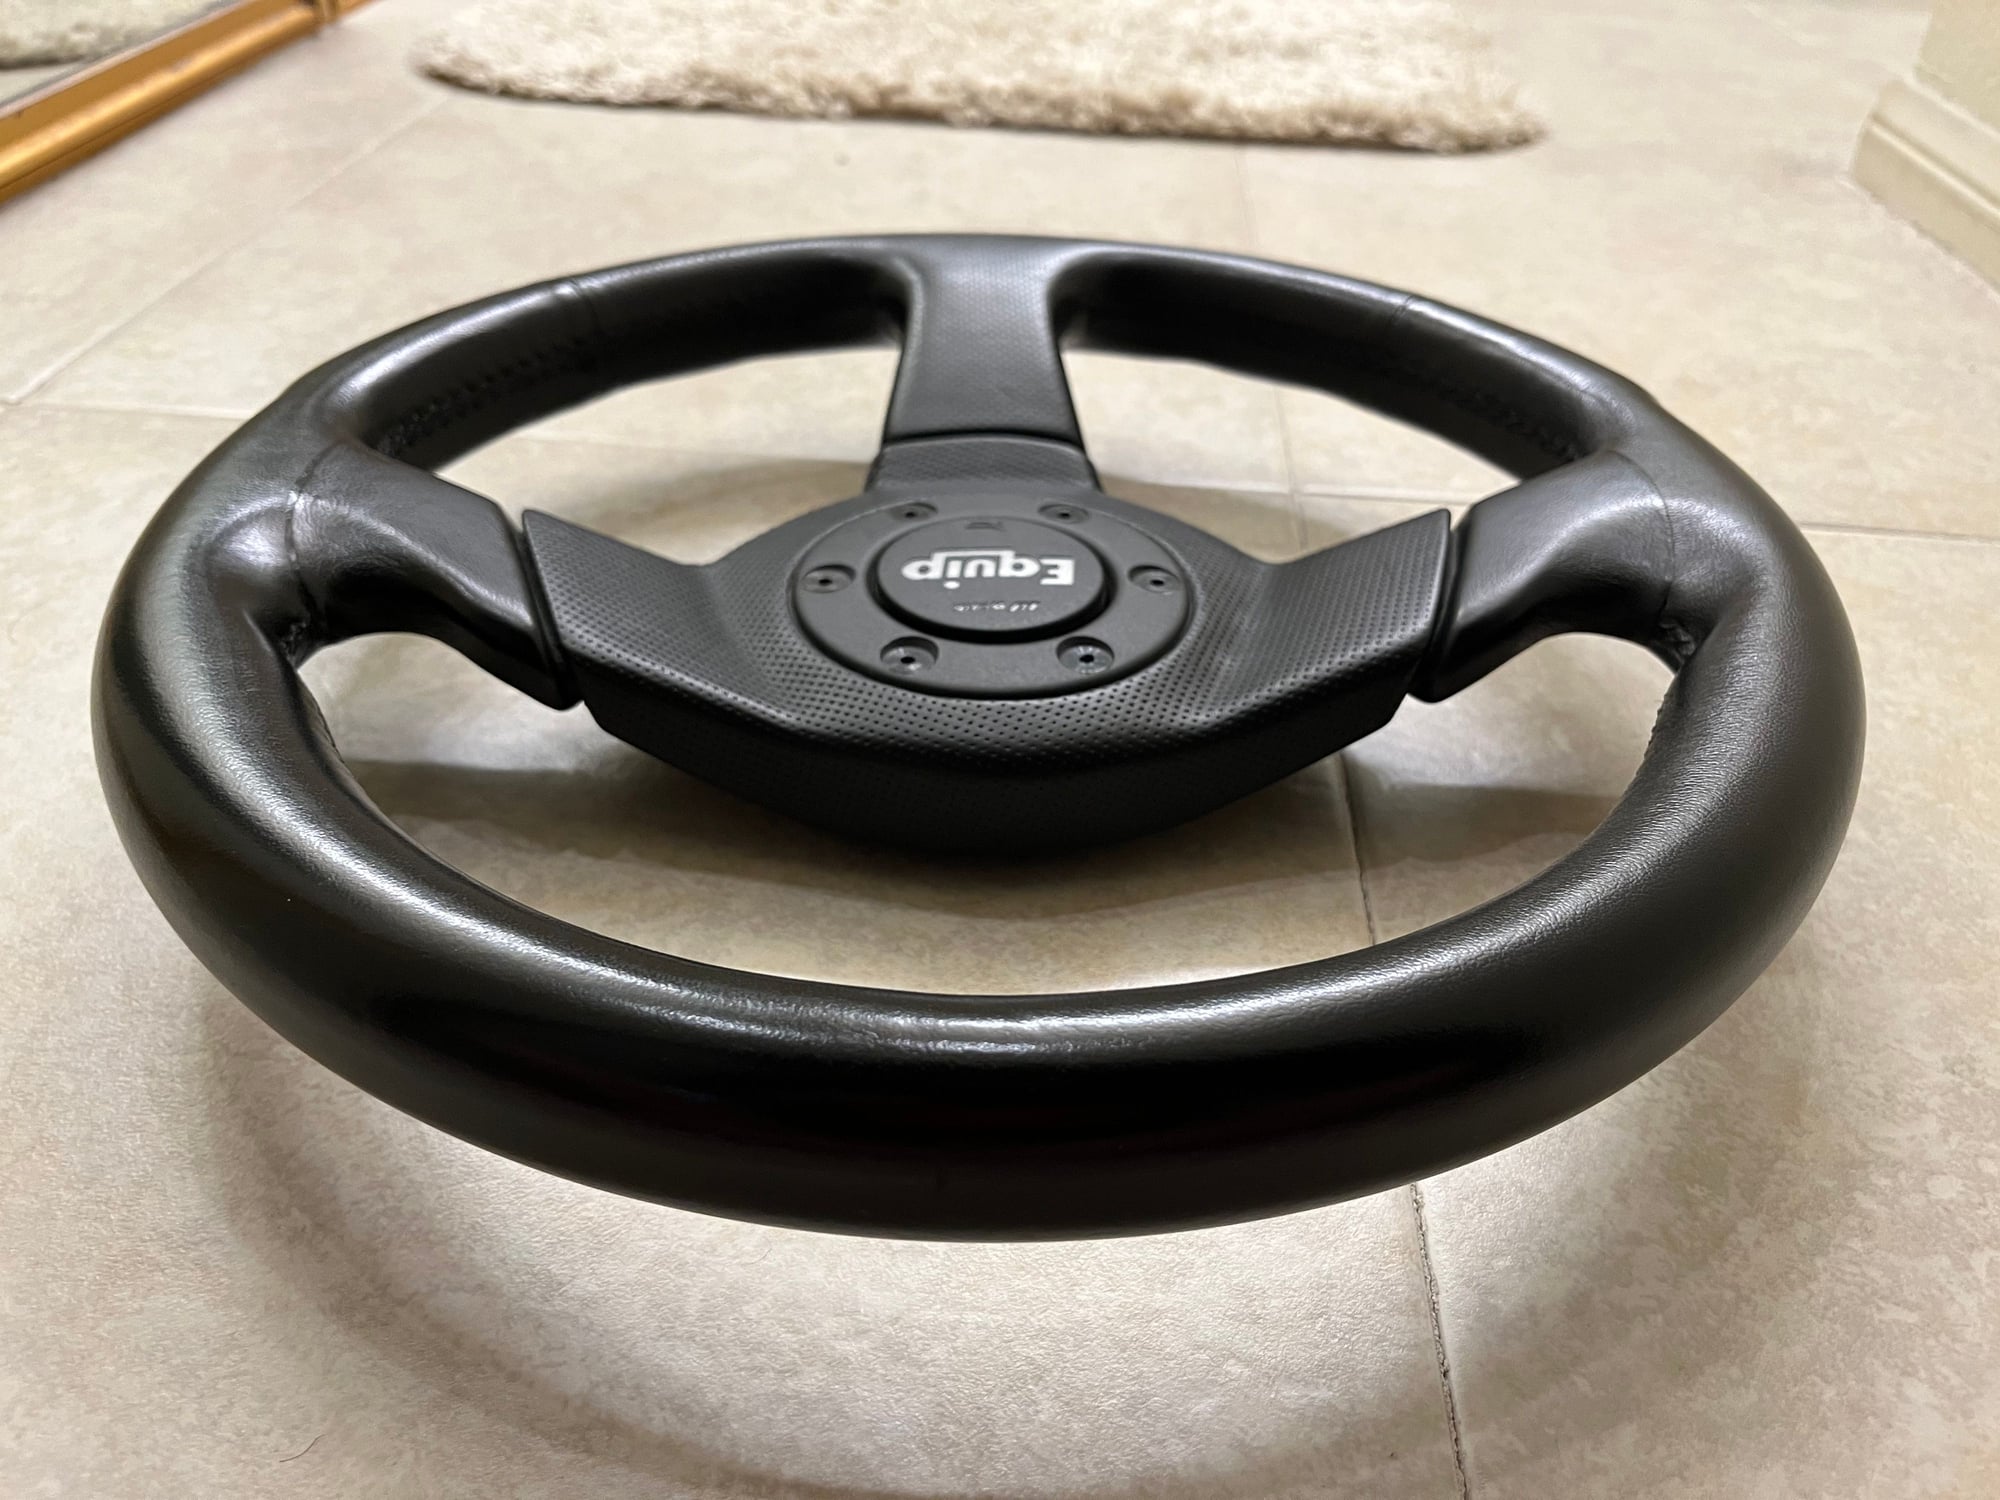 Interior/Upholstery - Perfect Rare Work Equip steering wheel - Used - 0  All Models - Gardena, CA 90247, United States